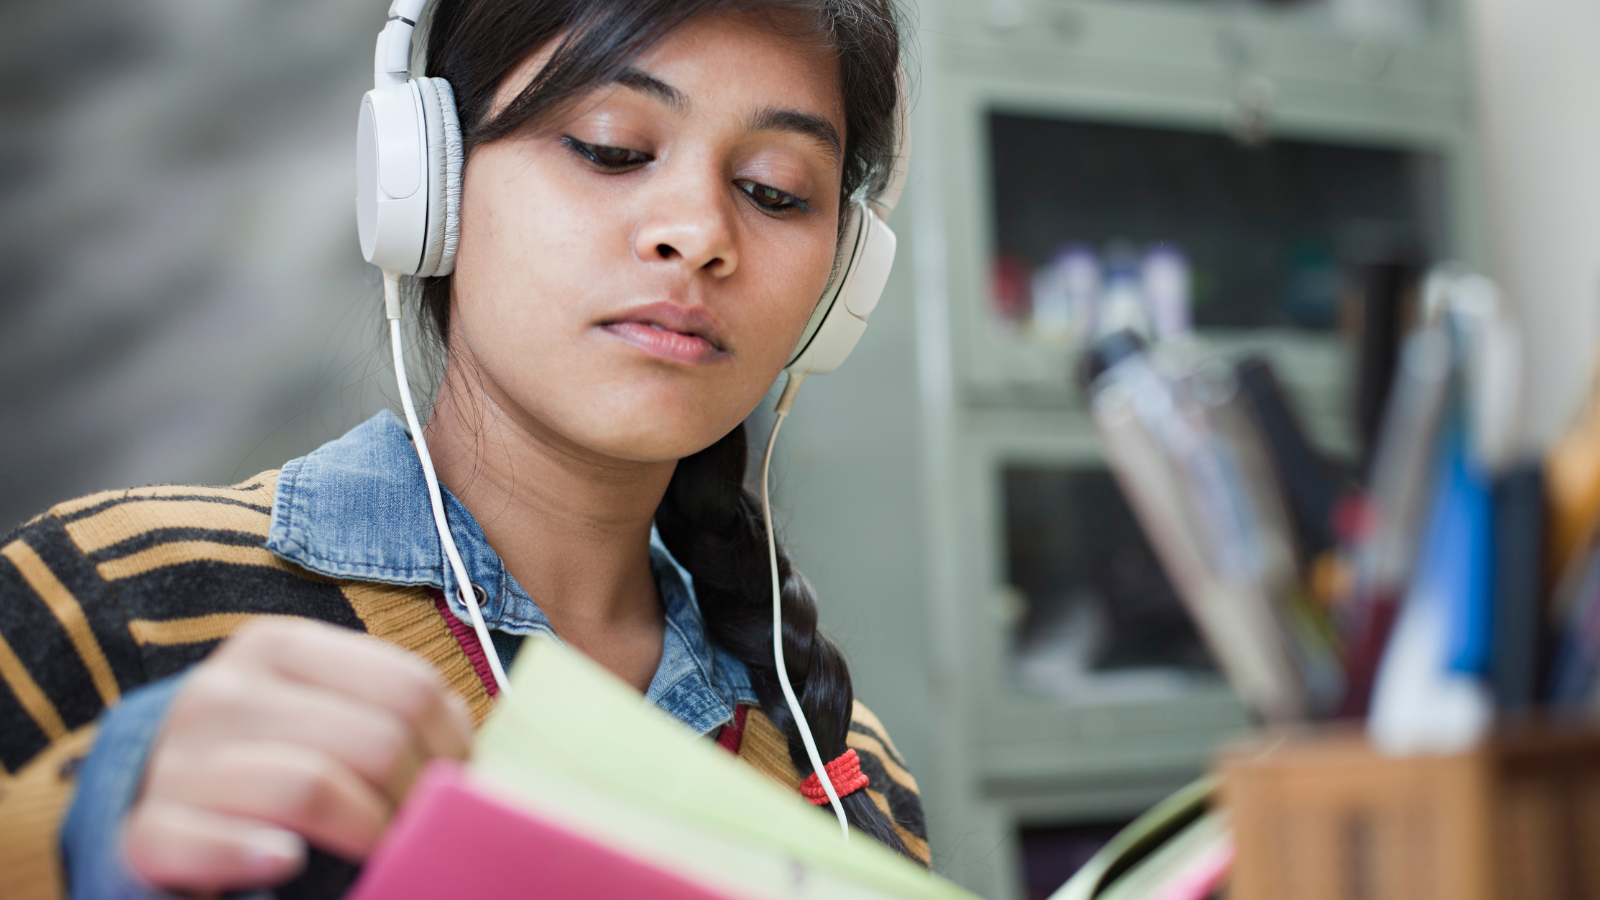 Teenager reading a book with headphones